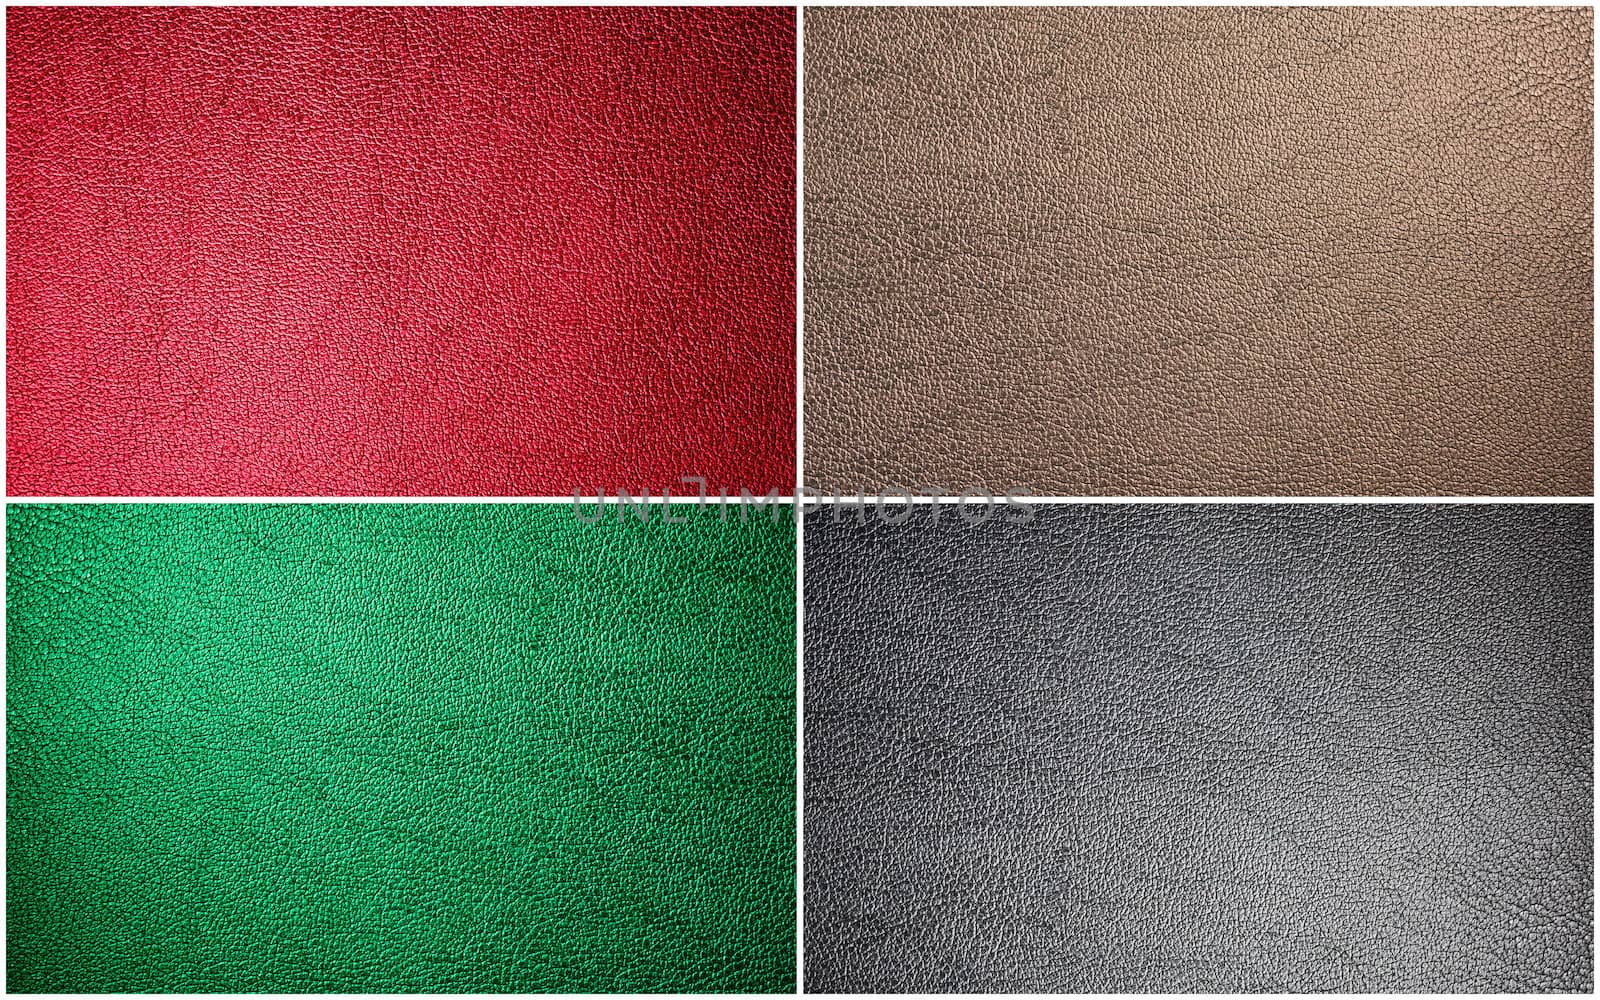 Collage Leather Texture For Background (Set Of Leather Texture Made From Deer Skin (Red, Green, Black, Beige)